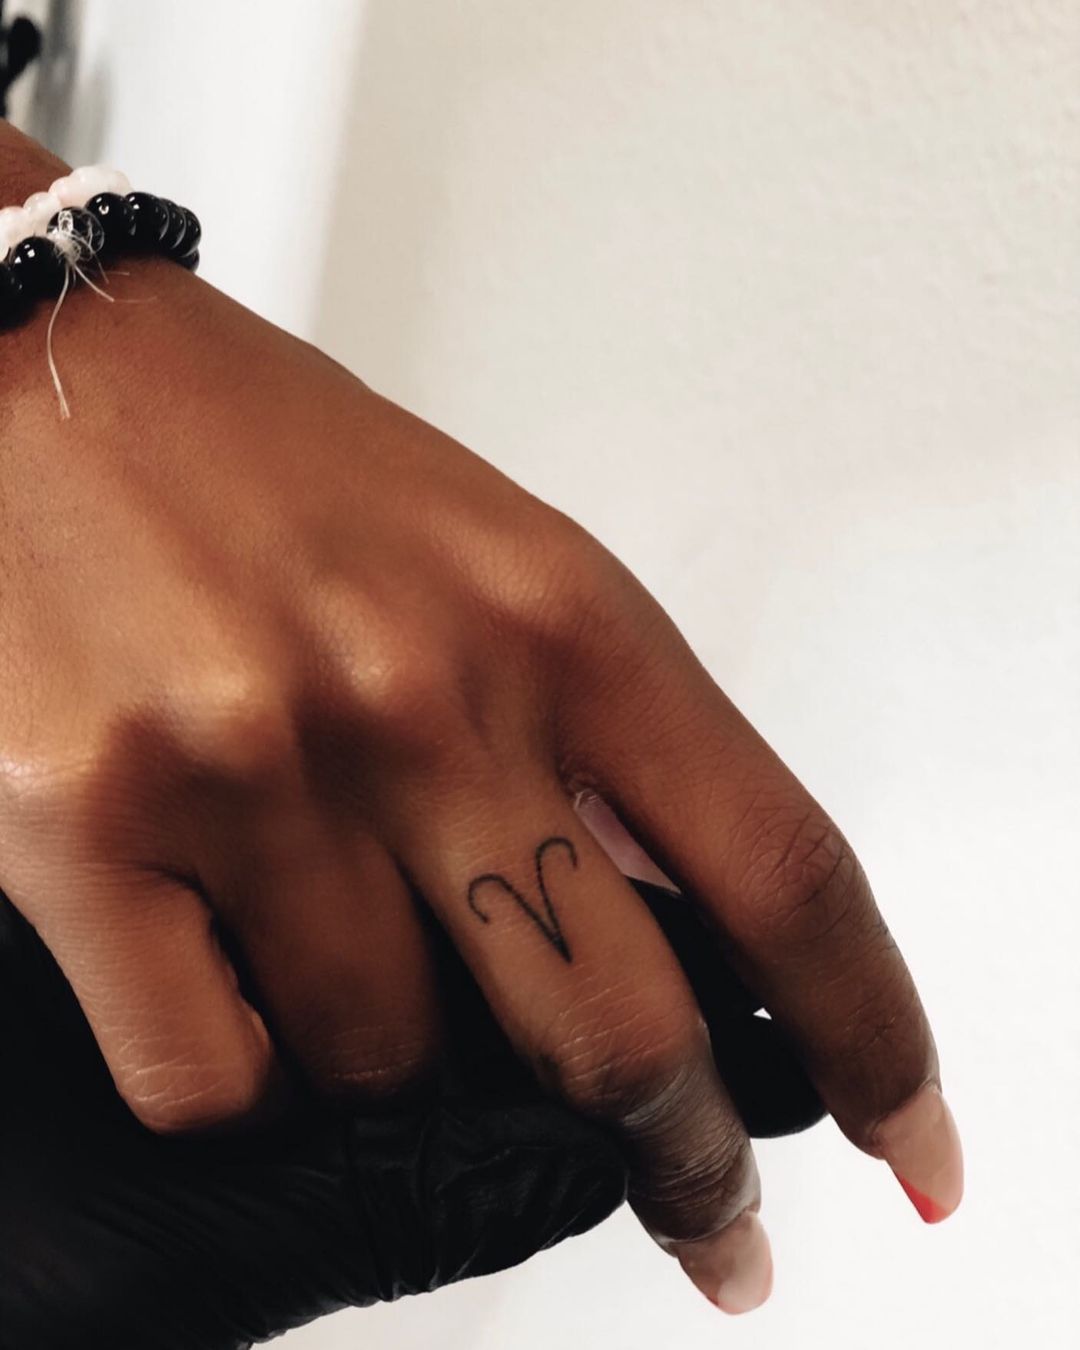 30 cool fingers tattoo ideas for men  small tattoo ideas for men  YouTube